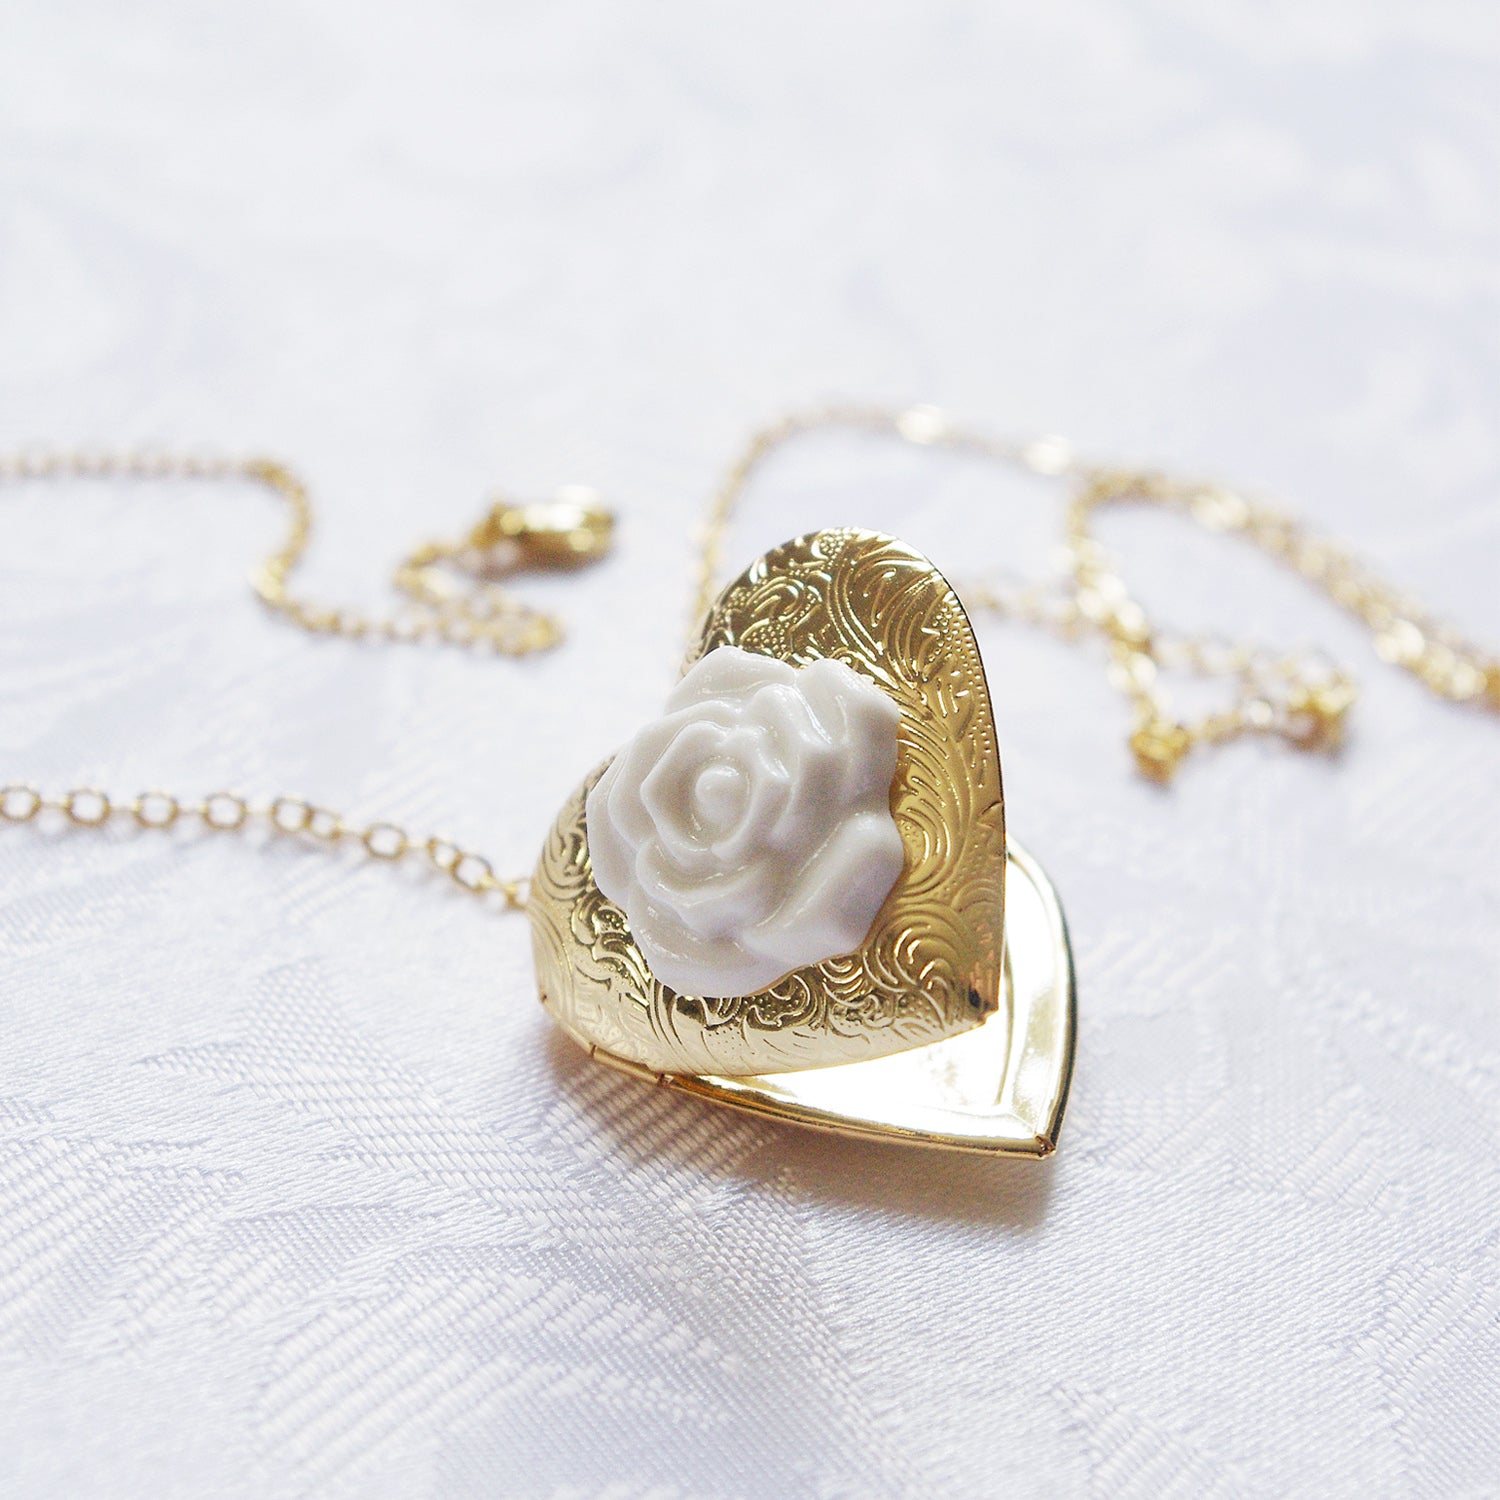 Classic Heart Locket With Porcelain Rose Pendant Necklace - Hèrosse